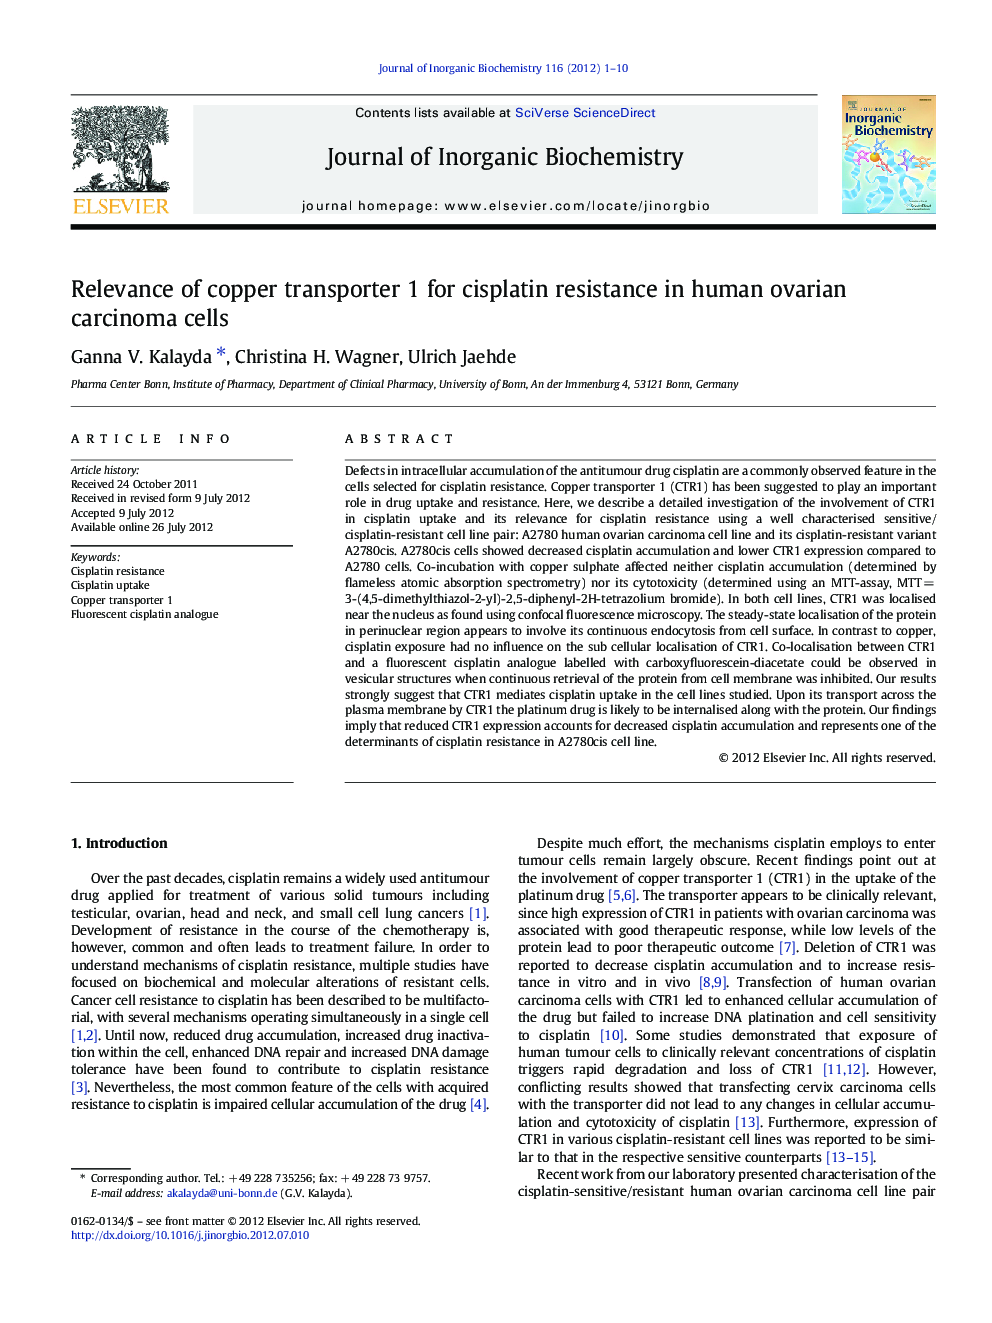 Relevance of copper transporter 1 for cisplatin resistance in human ovarian carcinoma cells